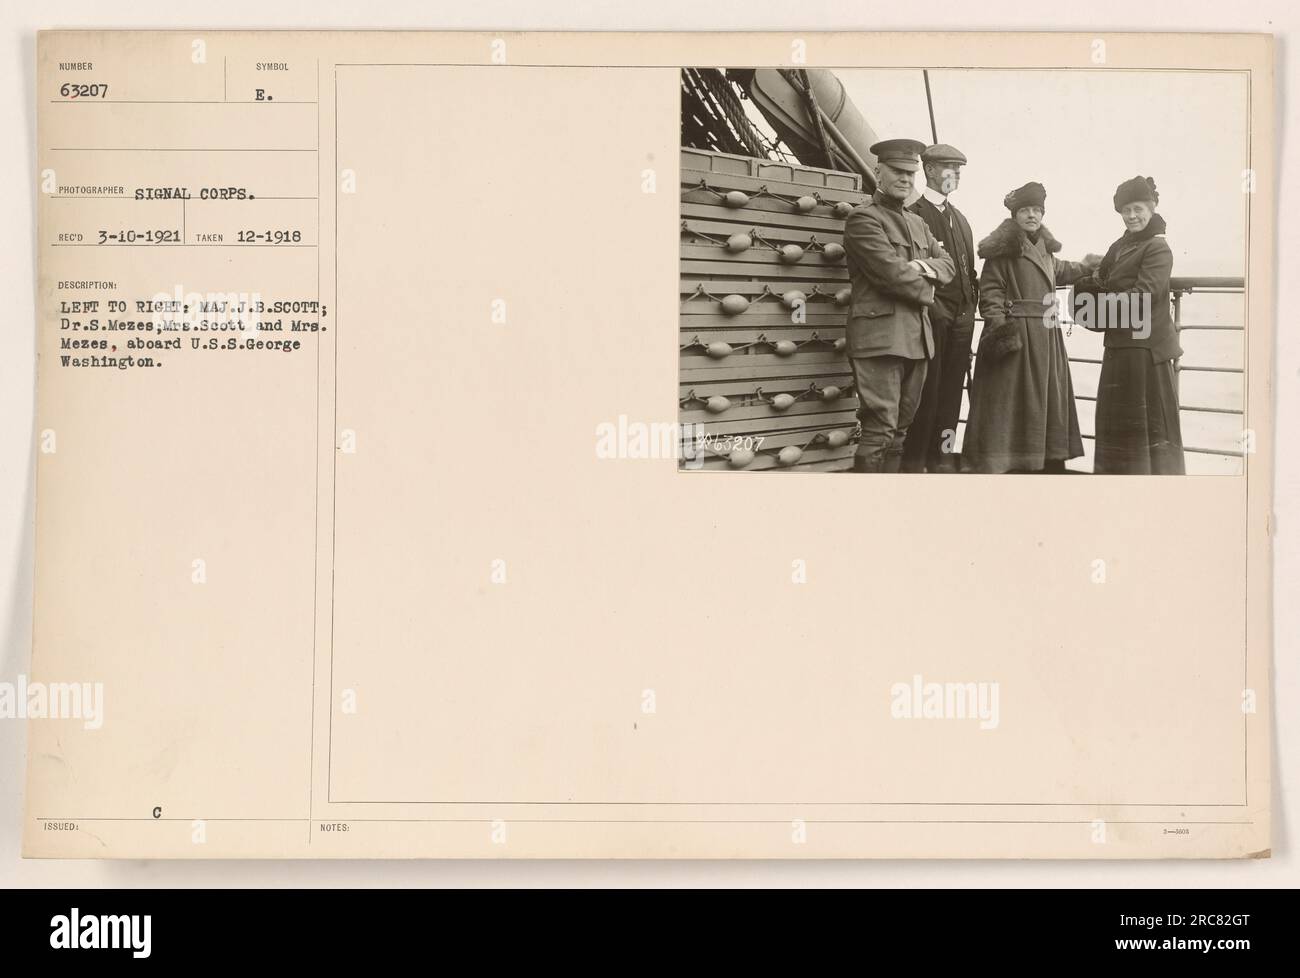 From left to right: Major J.B. Scott, Dr. S. Mezes, Mrs. Scott, and Mrs. Mezes are seen aboard the U.S.S. George Washington. This photograph was taken in December 1918 at 1800 hours. It was received by the Signal Corps on March 10, 1921 (Sumber 63207 Symbol E). Additional notes indicate the identities of the individuals captured in the image. Stock Photo